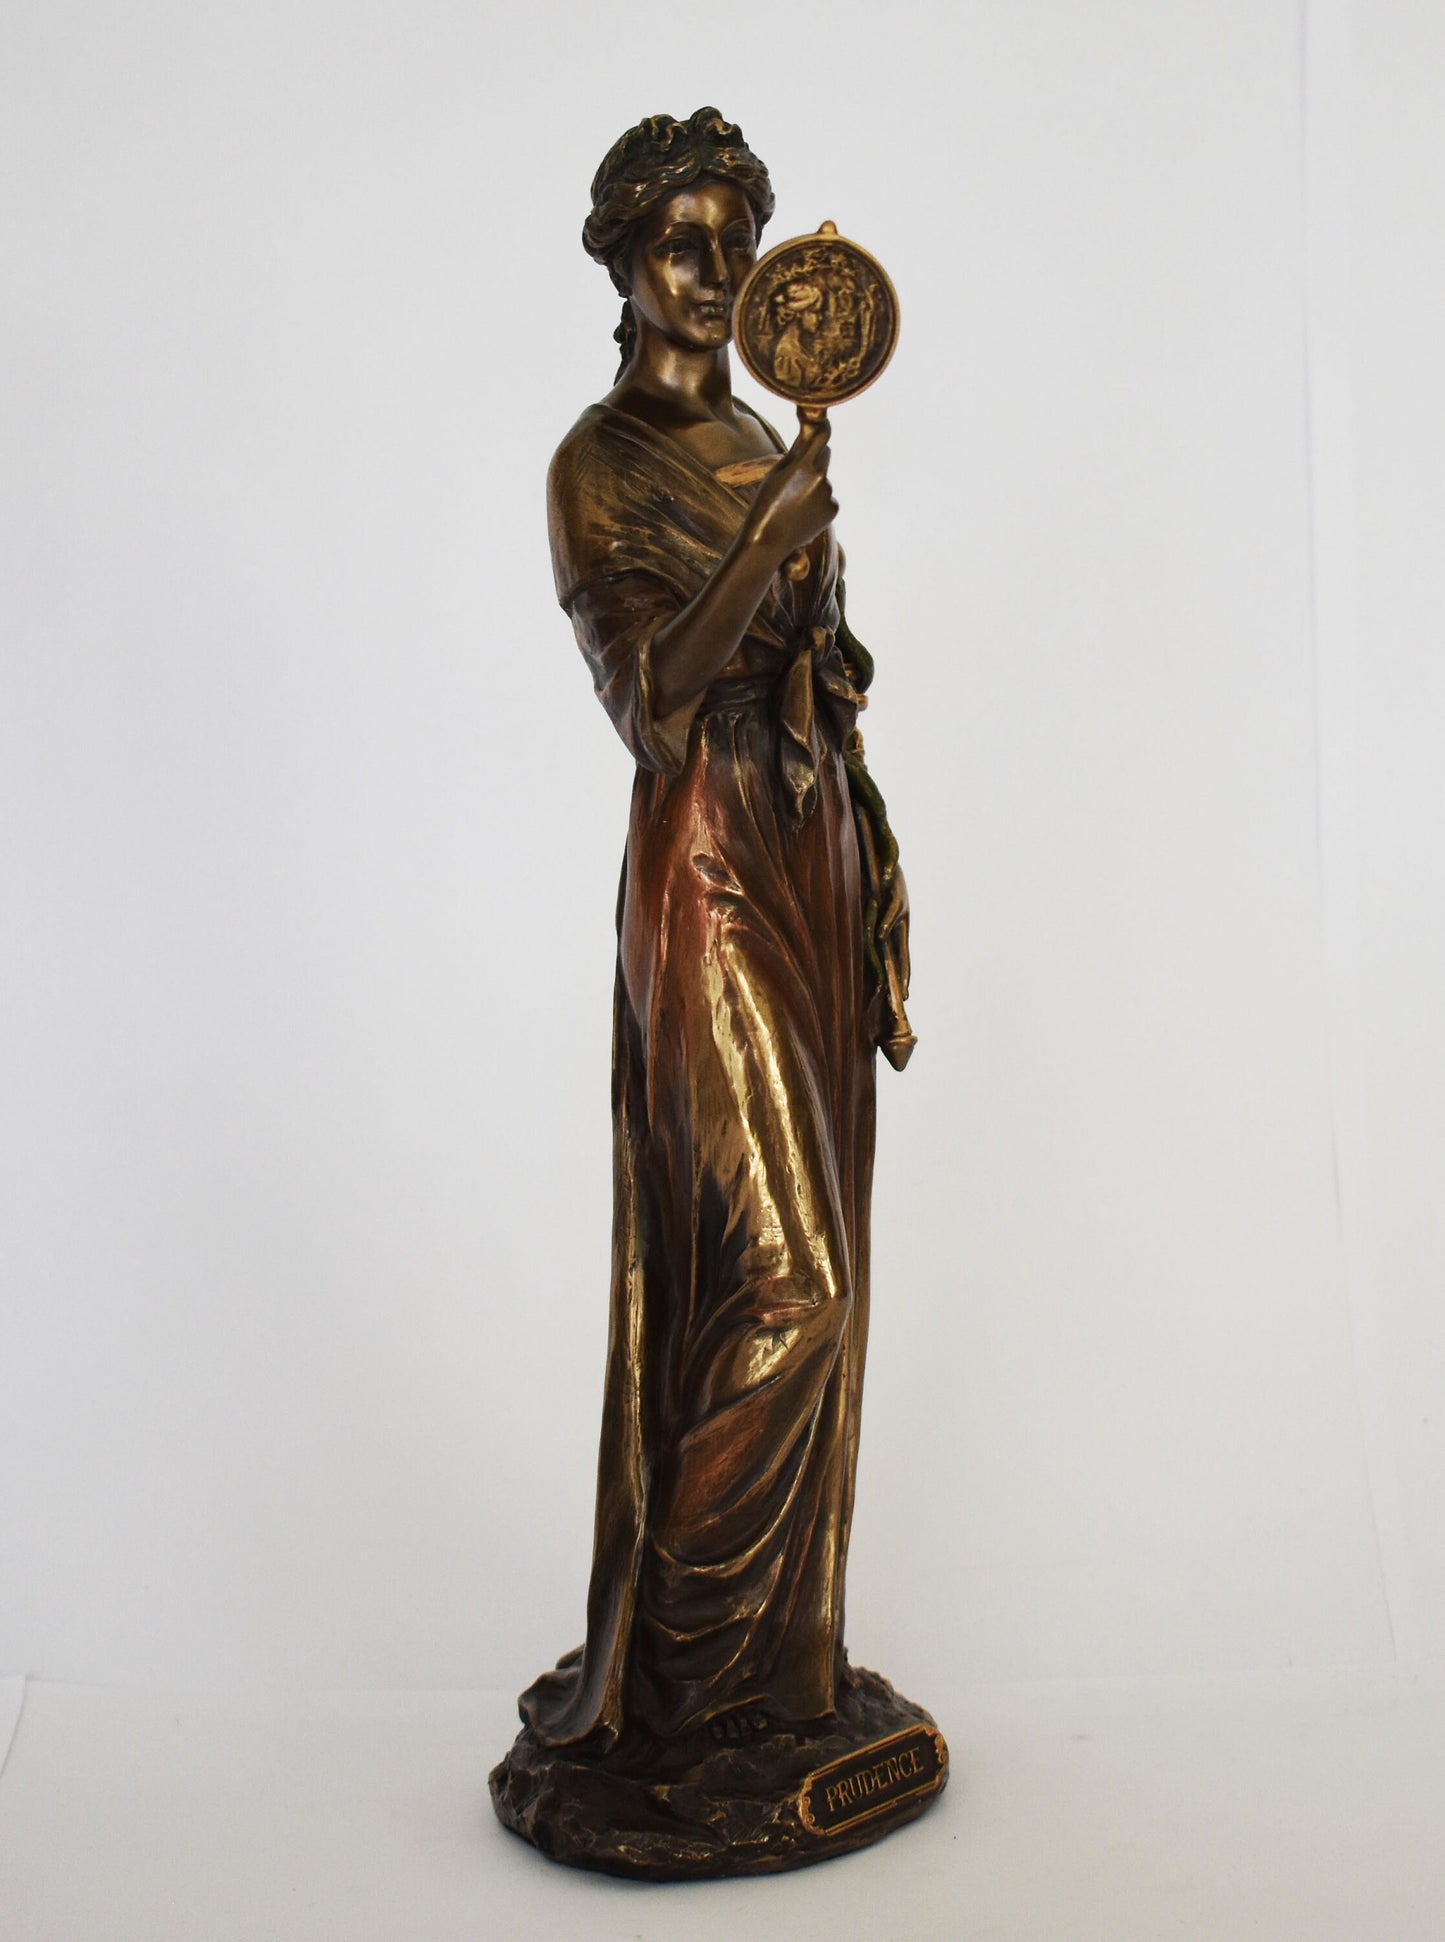 Prudence - Allegorical Female Personification of the Virtue - Mirror and Snake Symbols - Cold Cast Bronze Resin